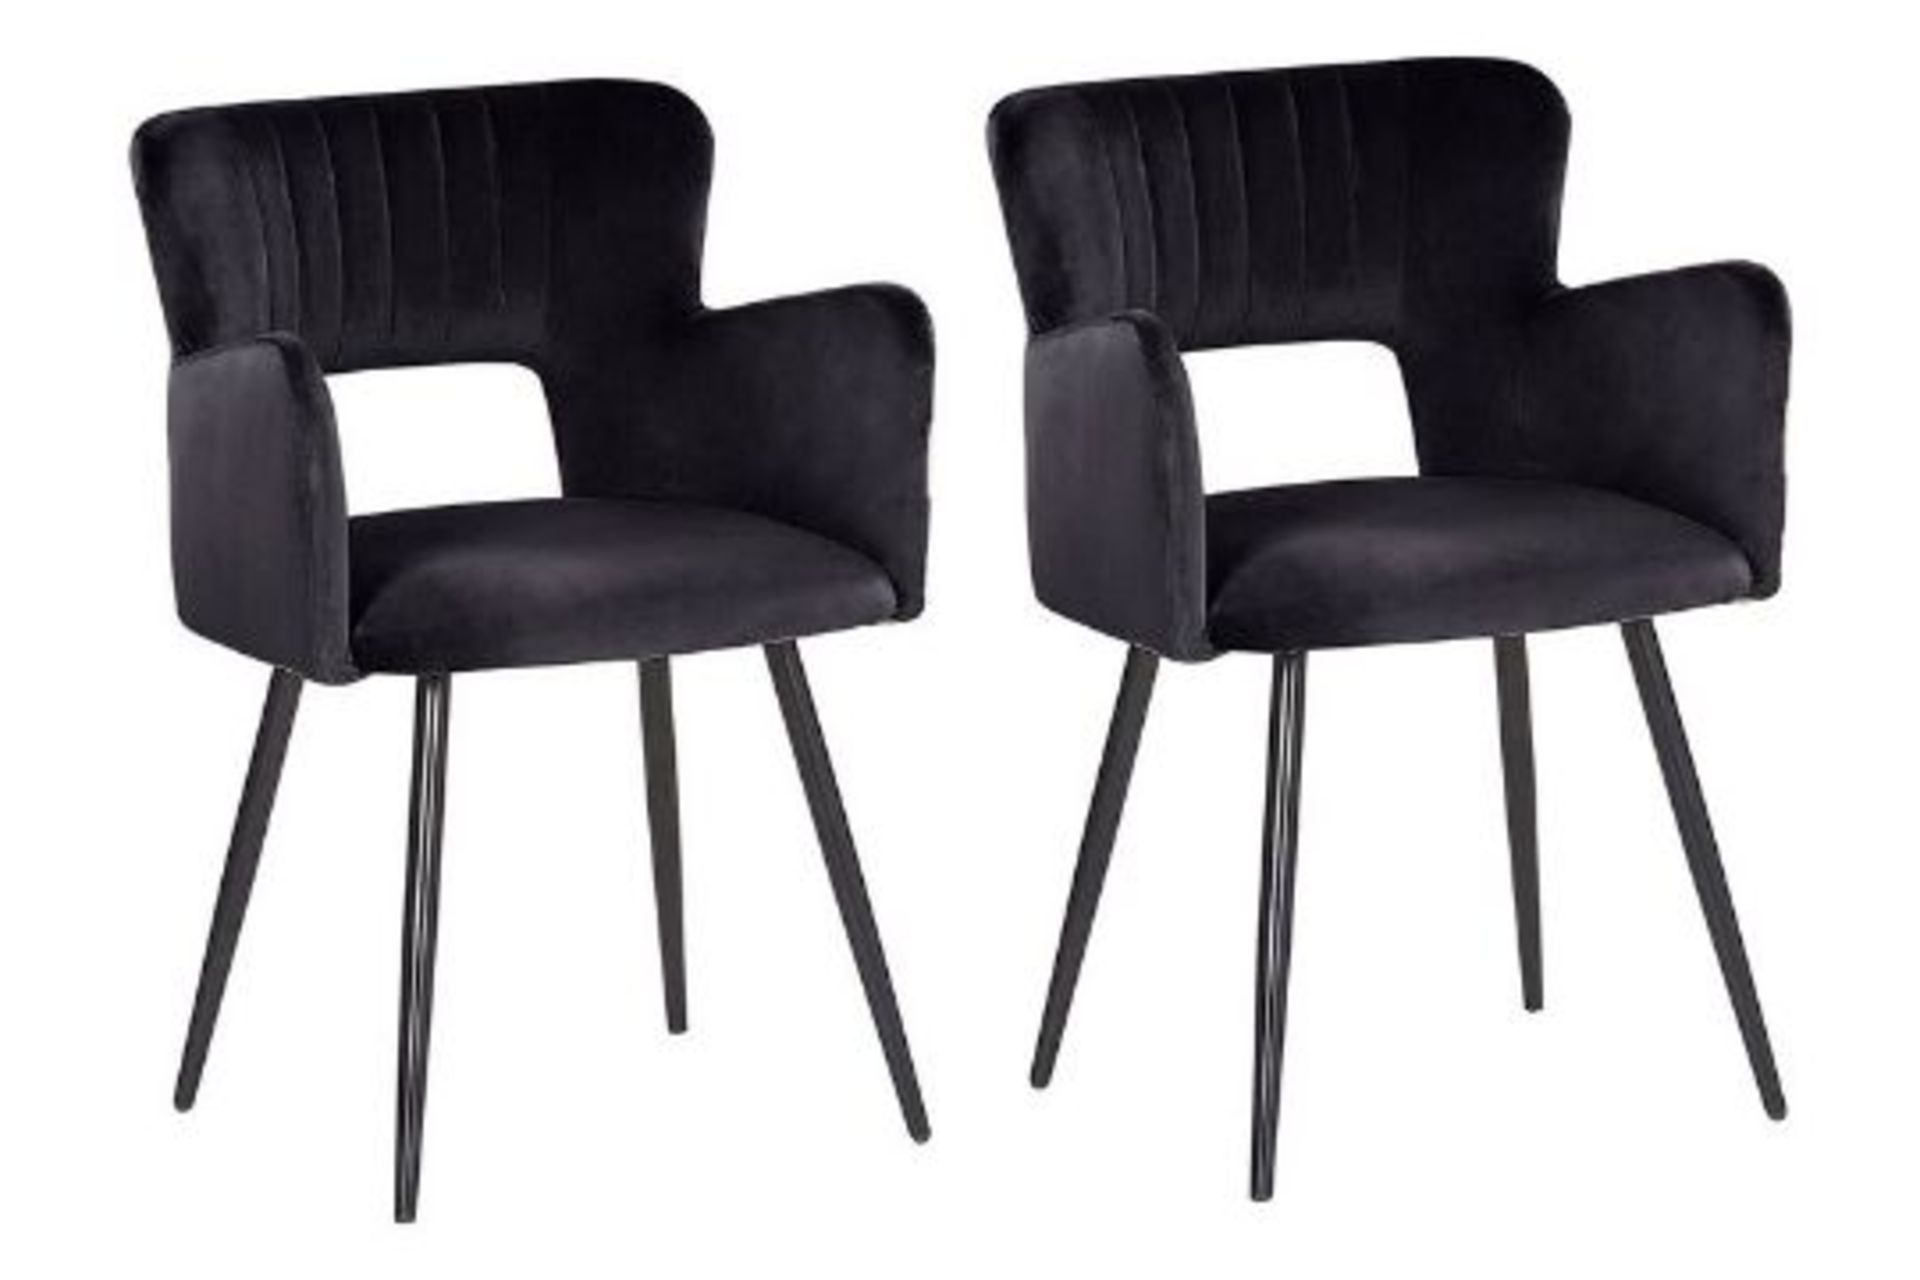 Sanilac Set of 2 Velvet Dining Chairs Black6/12. - ER24. RRP £259.99. These chairs are all about